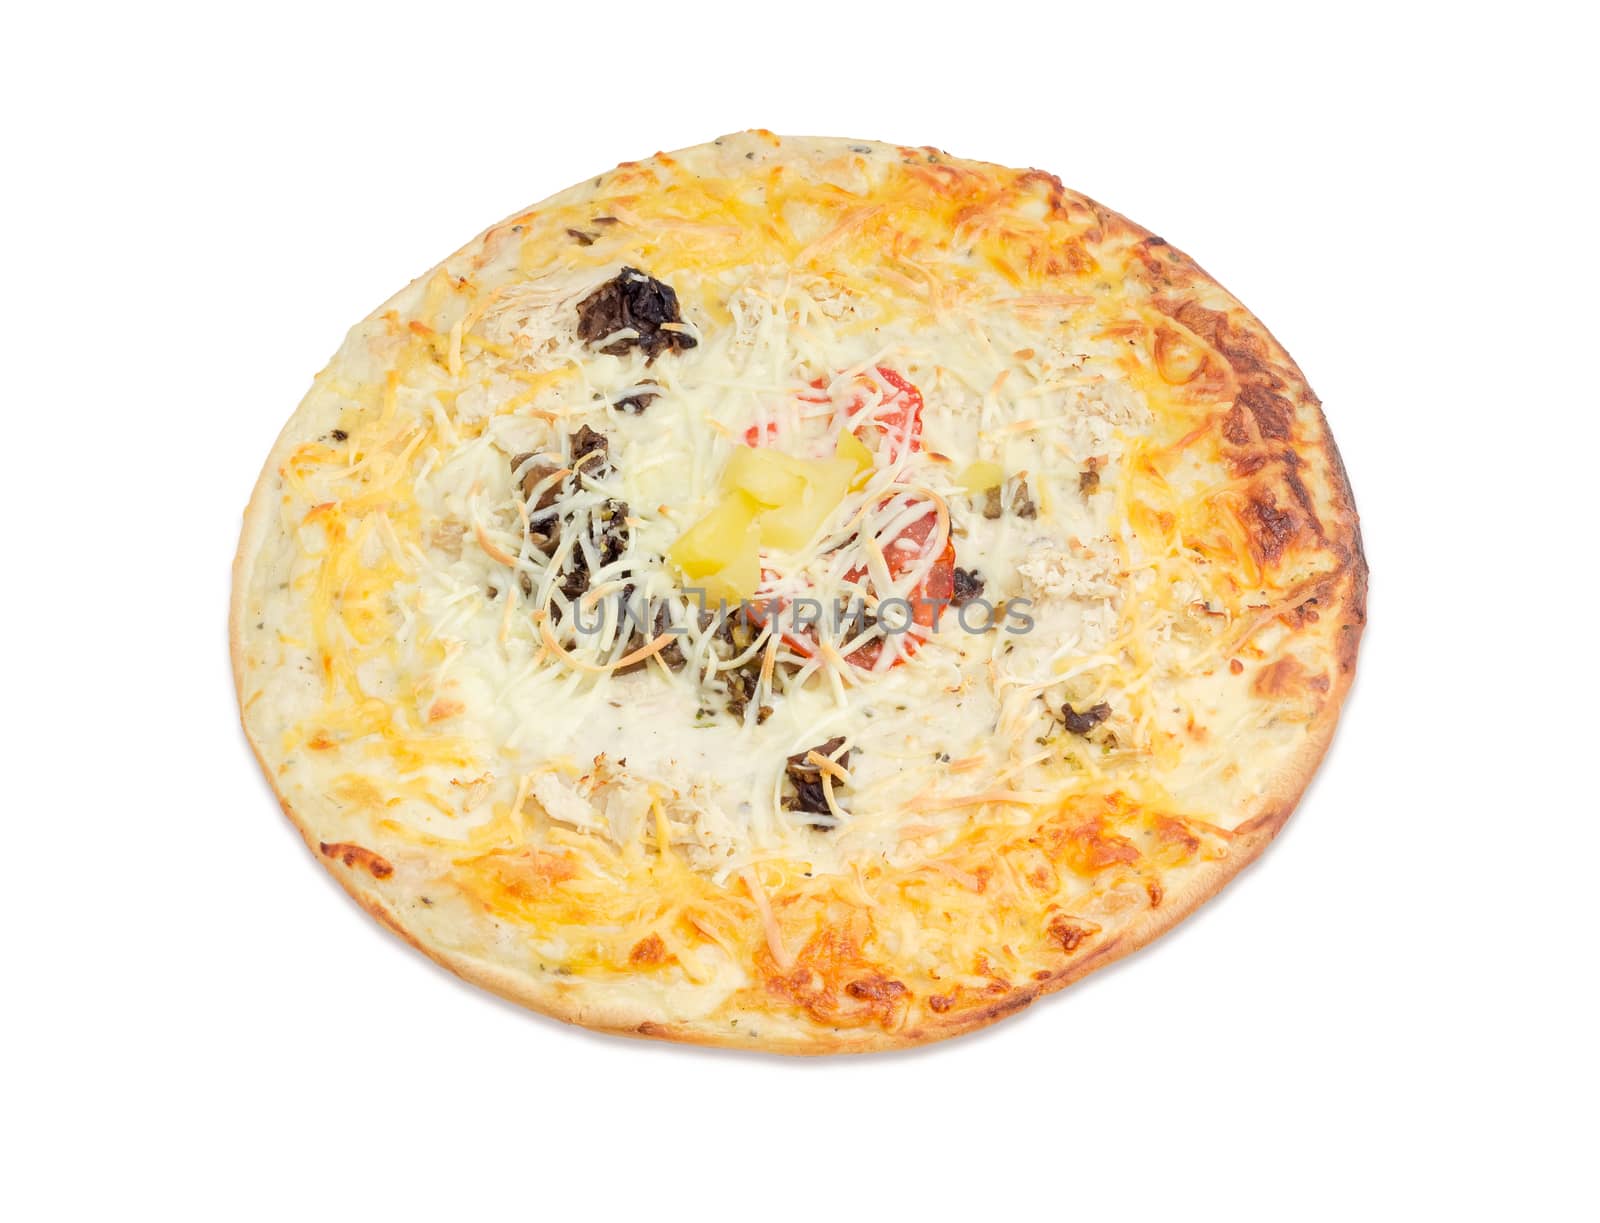 Cooked round pizza with mushrooms, tomatoes and plenty of cheese on a light background
